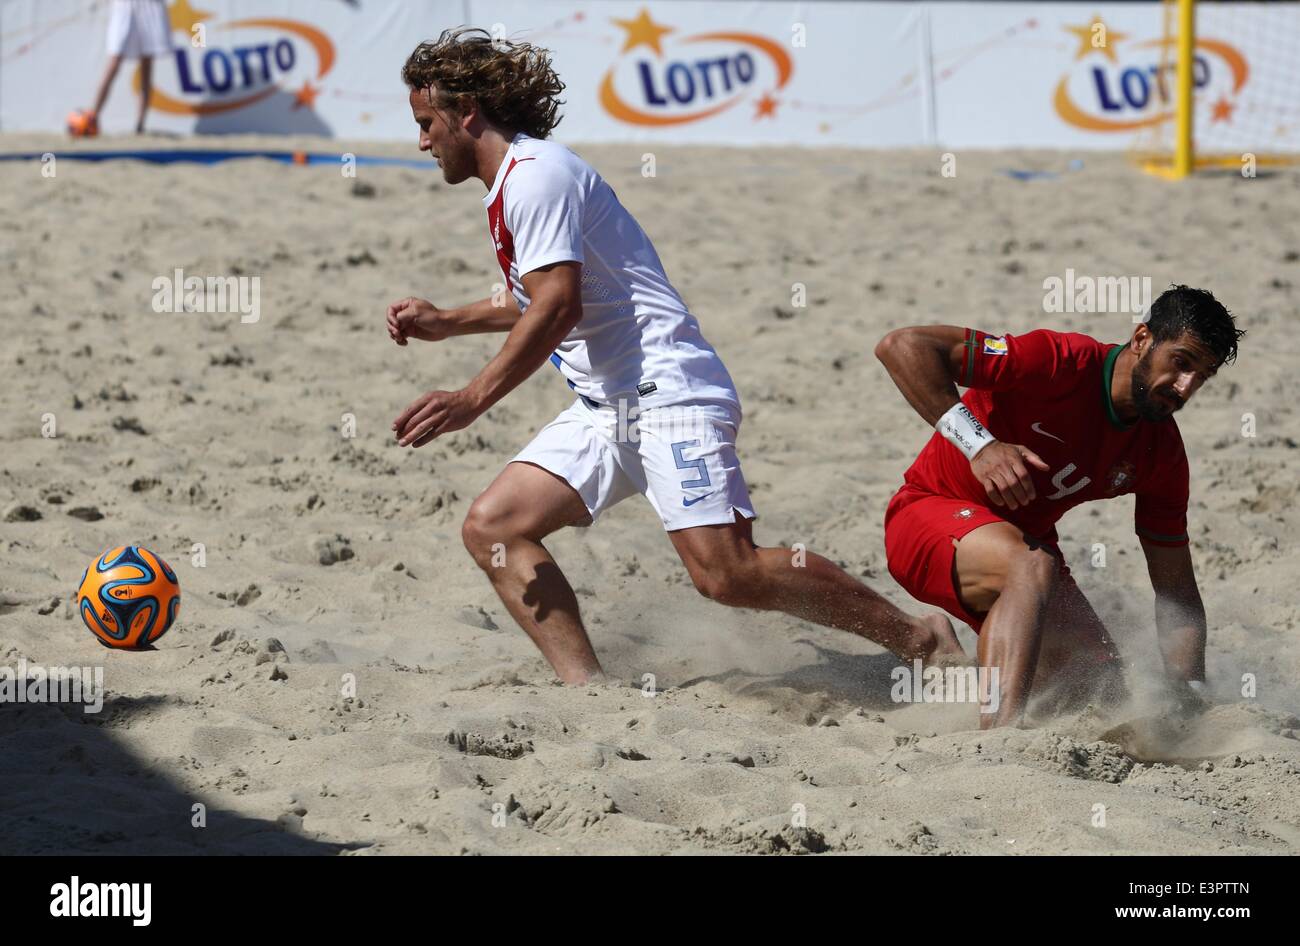 Sopot, Poland. 27th June, 2014. Euro Beach Soccer League tournament in Sopot.  Game between Portugal and Netherlands. Bruno Torres (4) in action against  Rene van Dieren during the game. Credit: Michal Fludra/Alamy